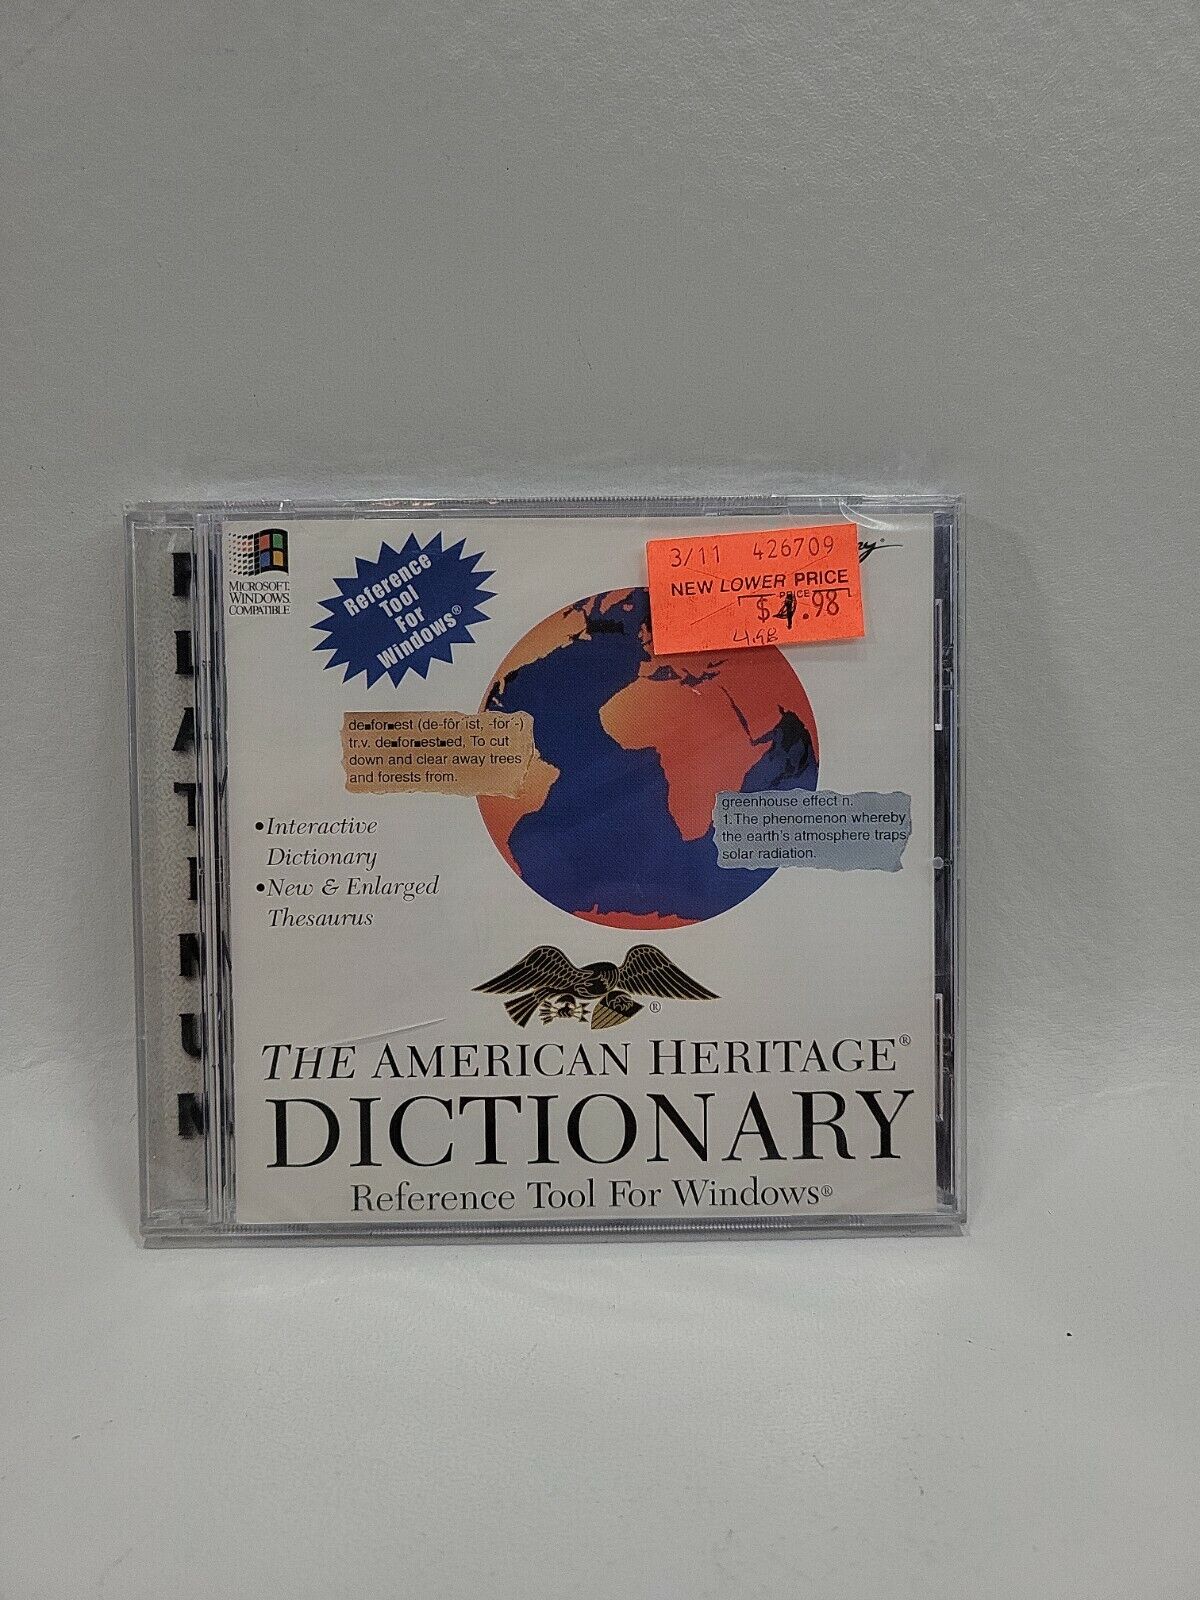 The American Heritage Dictionary Reference Tool Wor Windows - Factory Sealed 